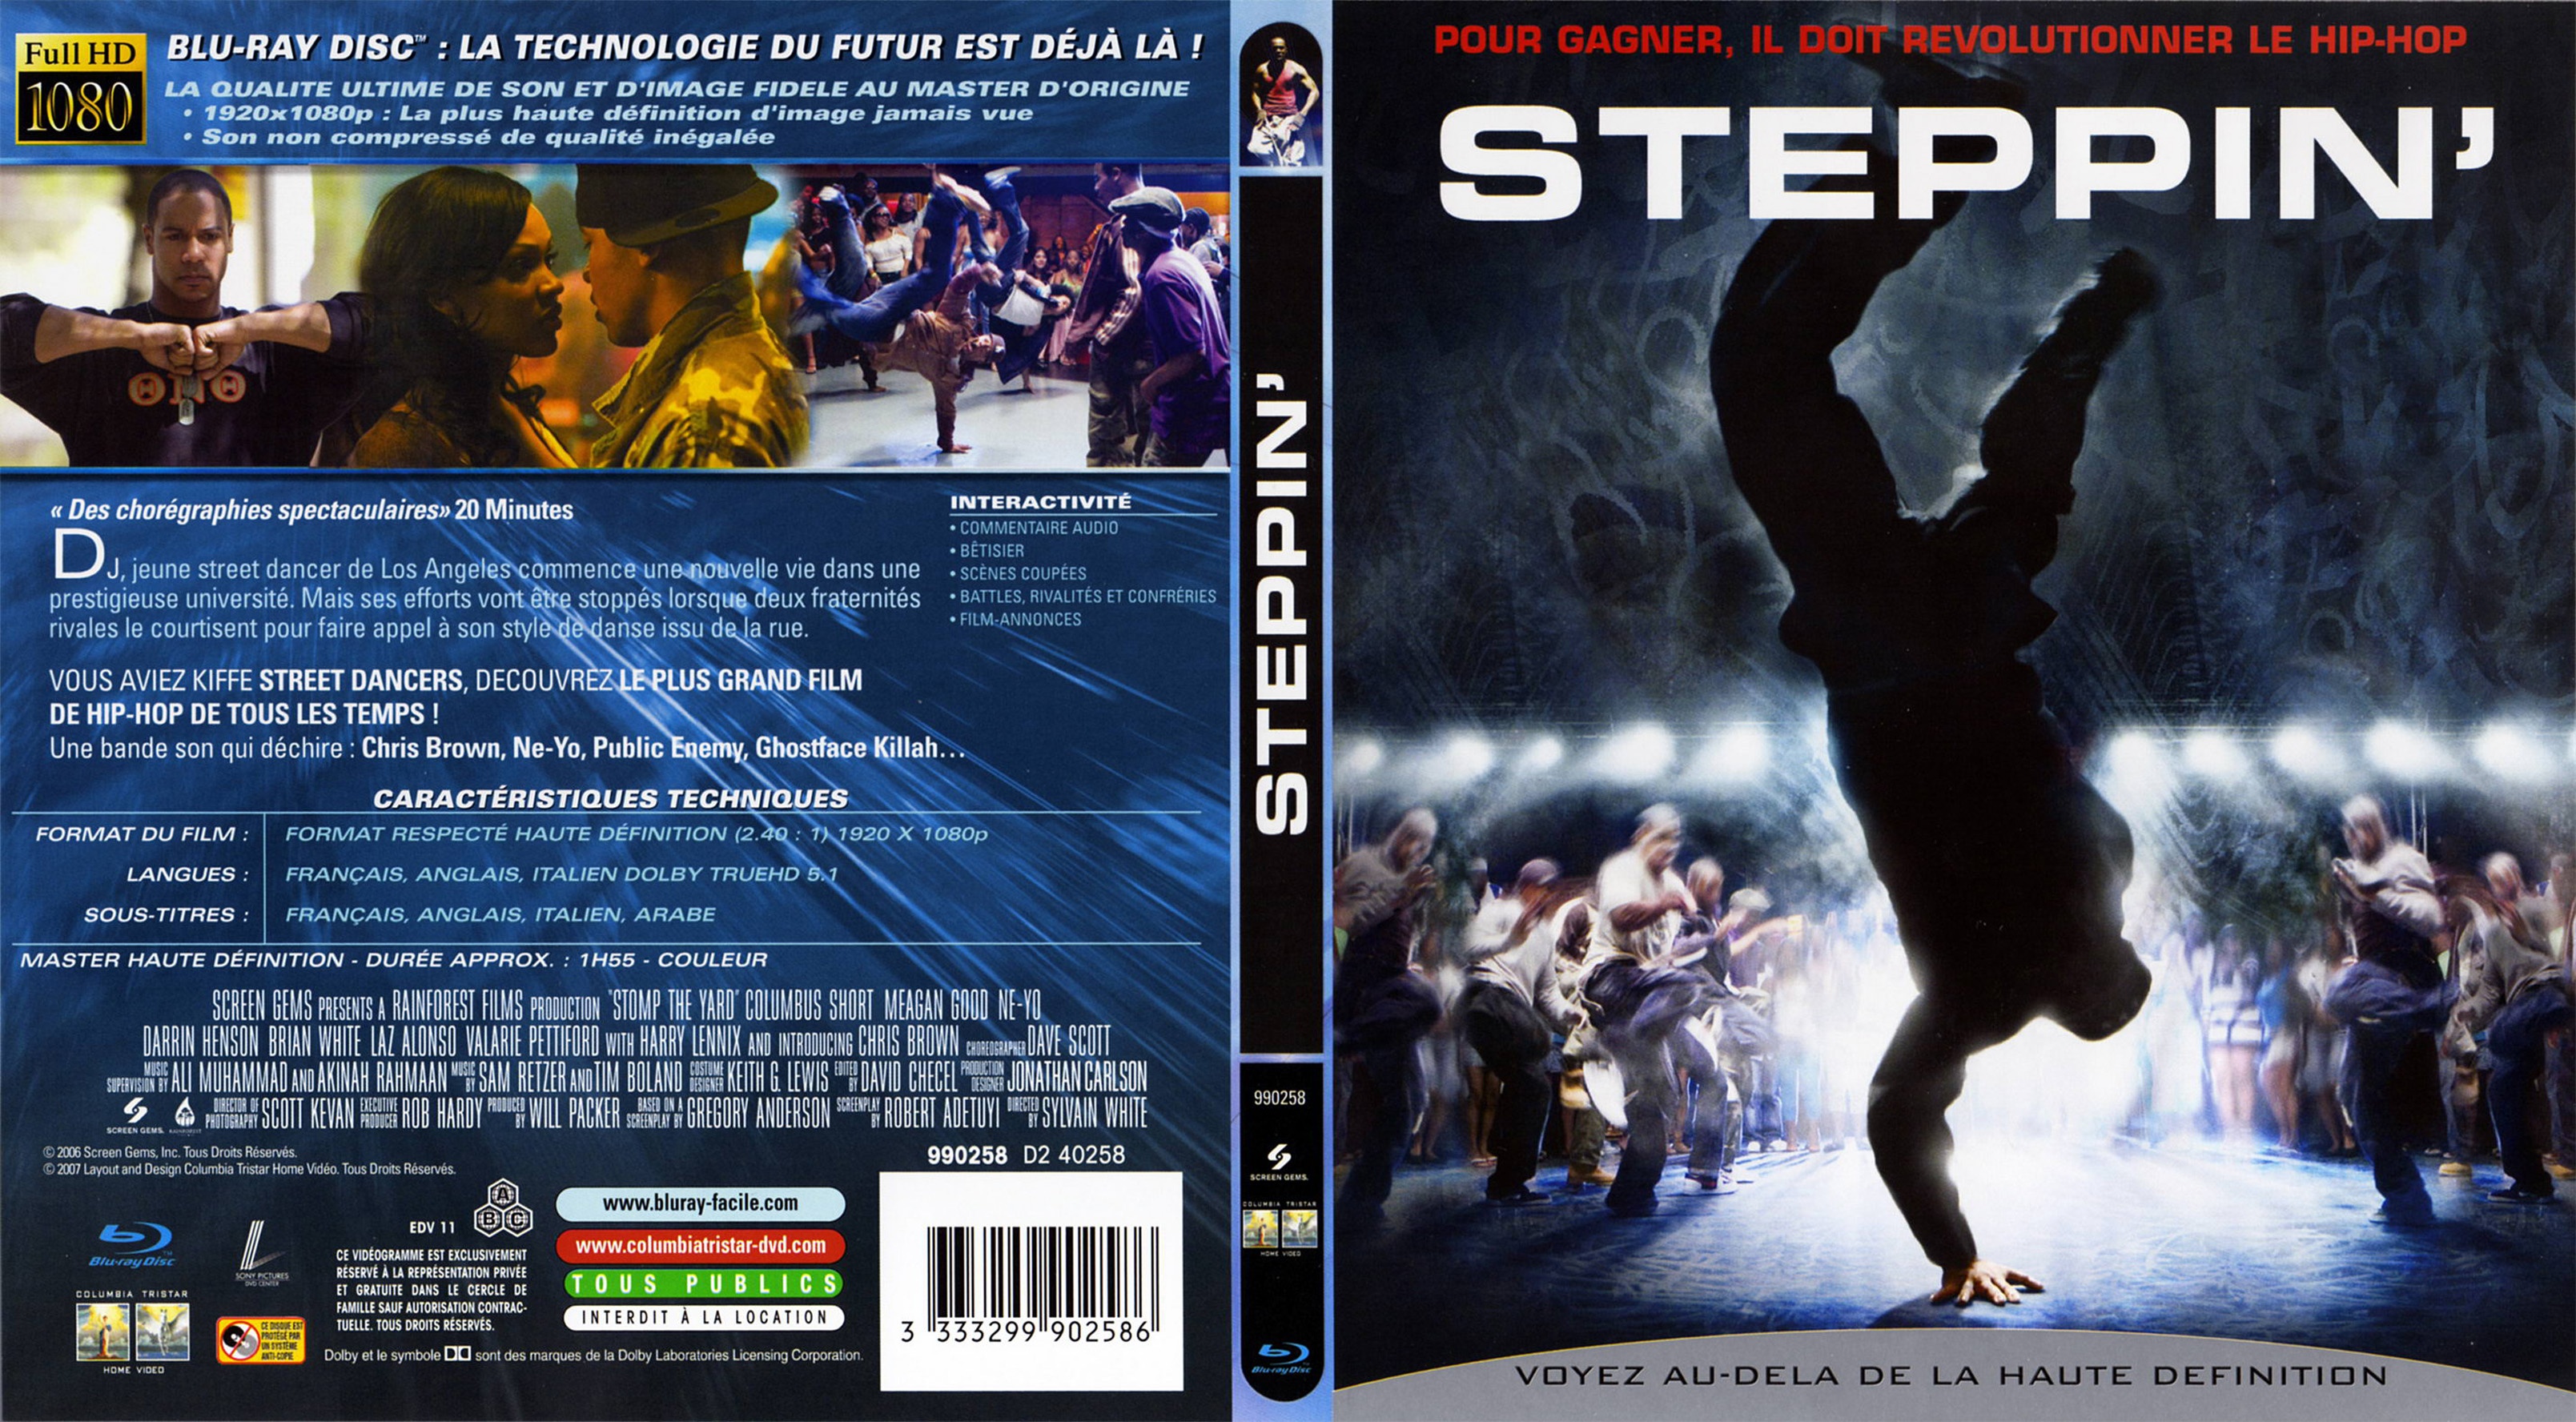 Jaquette DVD Steppin (BLU-RAY)